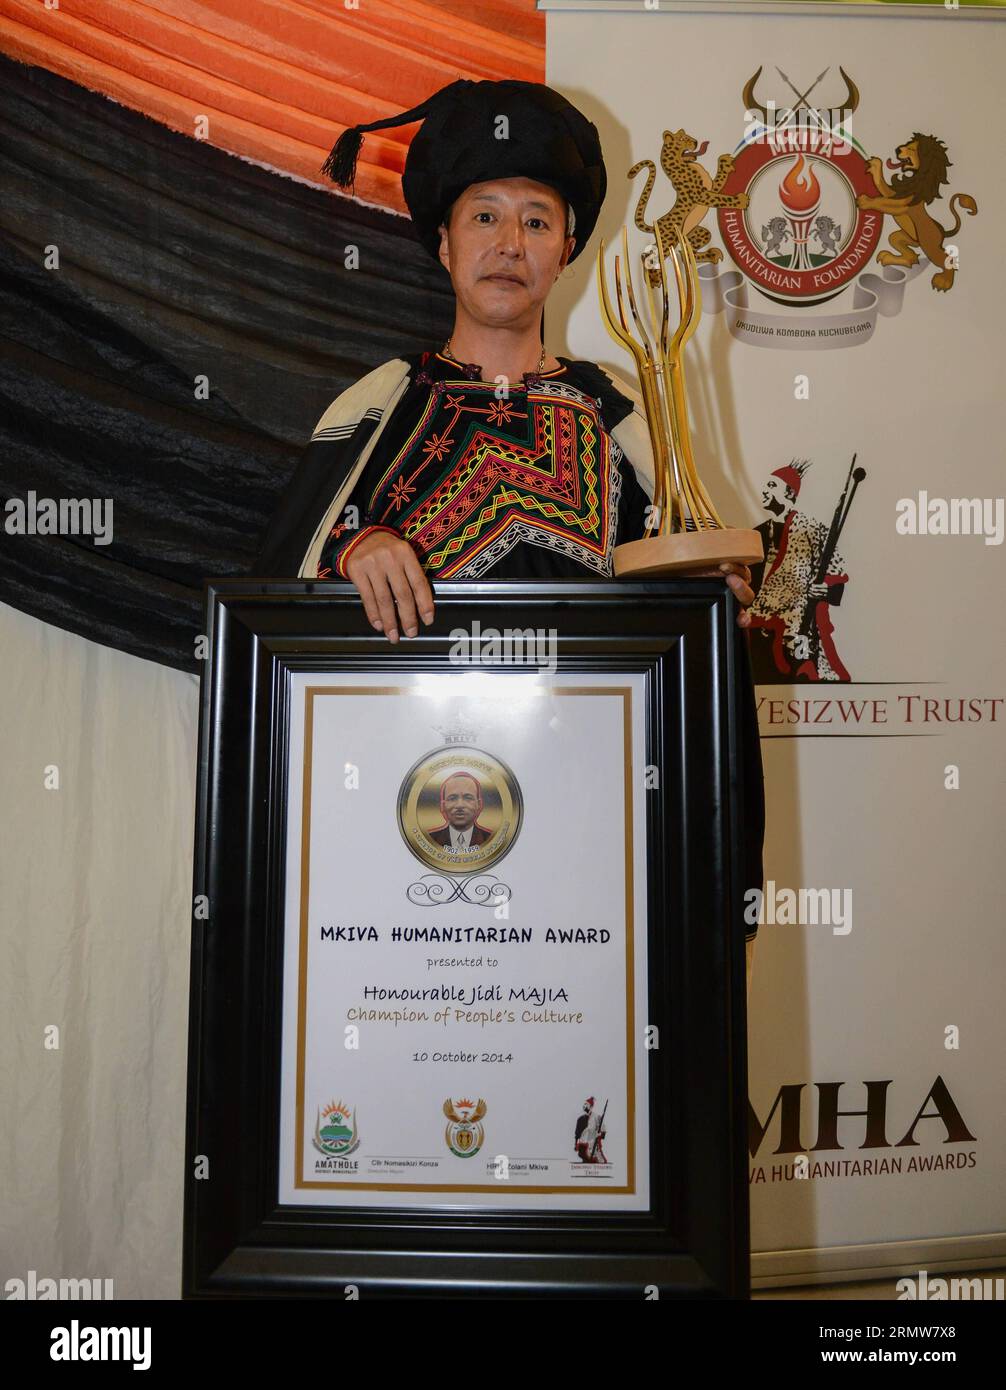 Jike Qubu, a student and representive of Jidi Majia who is a Chinese poet and winner of the 2014 Mkiva Humanitarian Awards, attends the awarding ceremony at Walter Sisulu University Butterworth Campus in Eastern Cape, South Africa, on Oct. 10, 2014. The Mkiva Humanitarian Awards celebrates the efforts and successes of African and International leaders who have made an impact on local or international communities. This year s recipients include: Jidi Majia of China, Saeb Erekat of Palestine, Queen Best Kemigisa of Uganda and Rebecca Malope, Mzimasi Mnguni and Mthetheleli NgumbelaThe of South Af Stock Photo